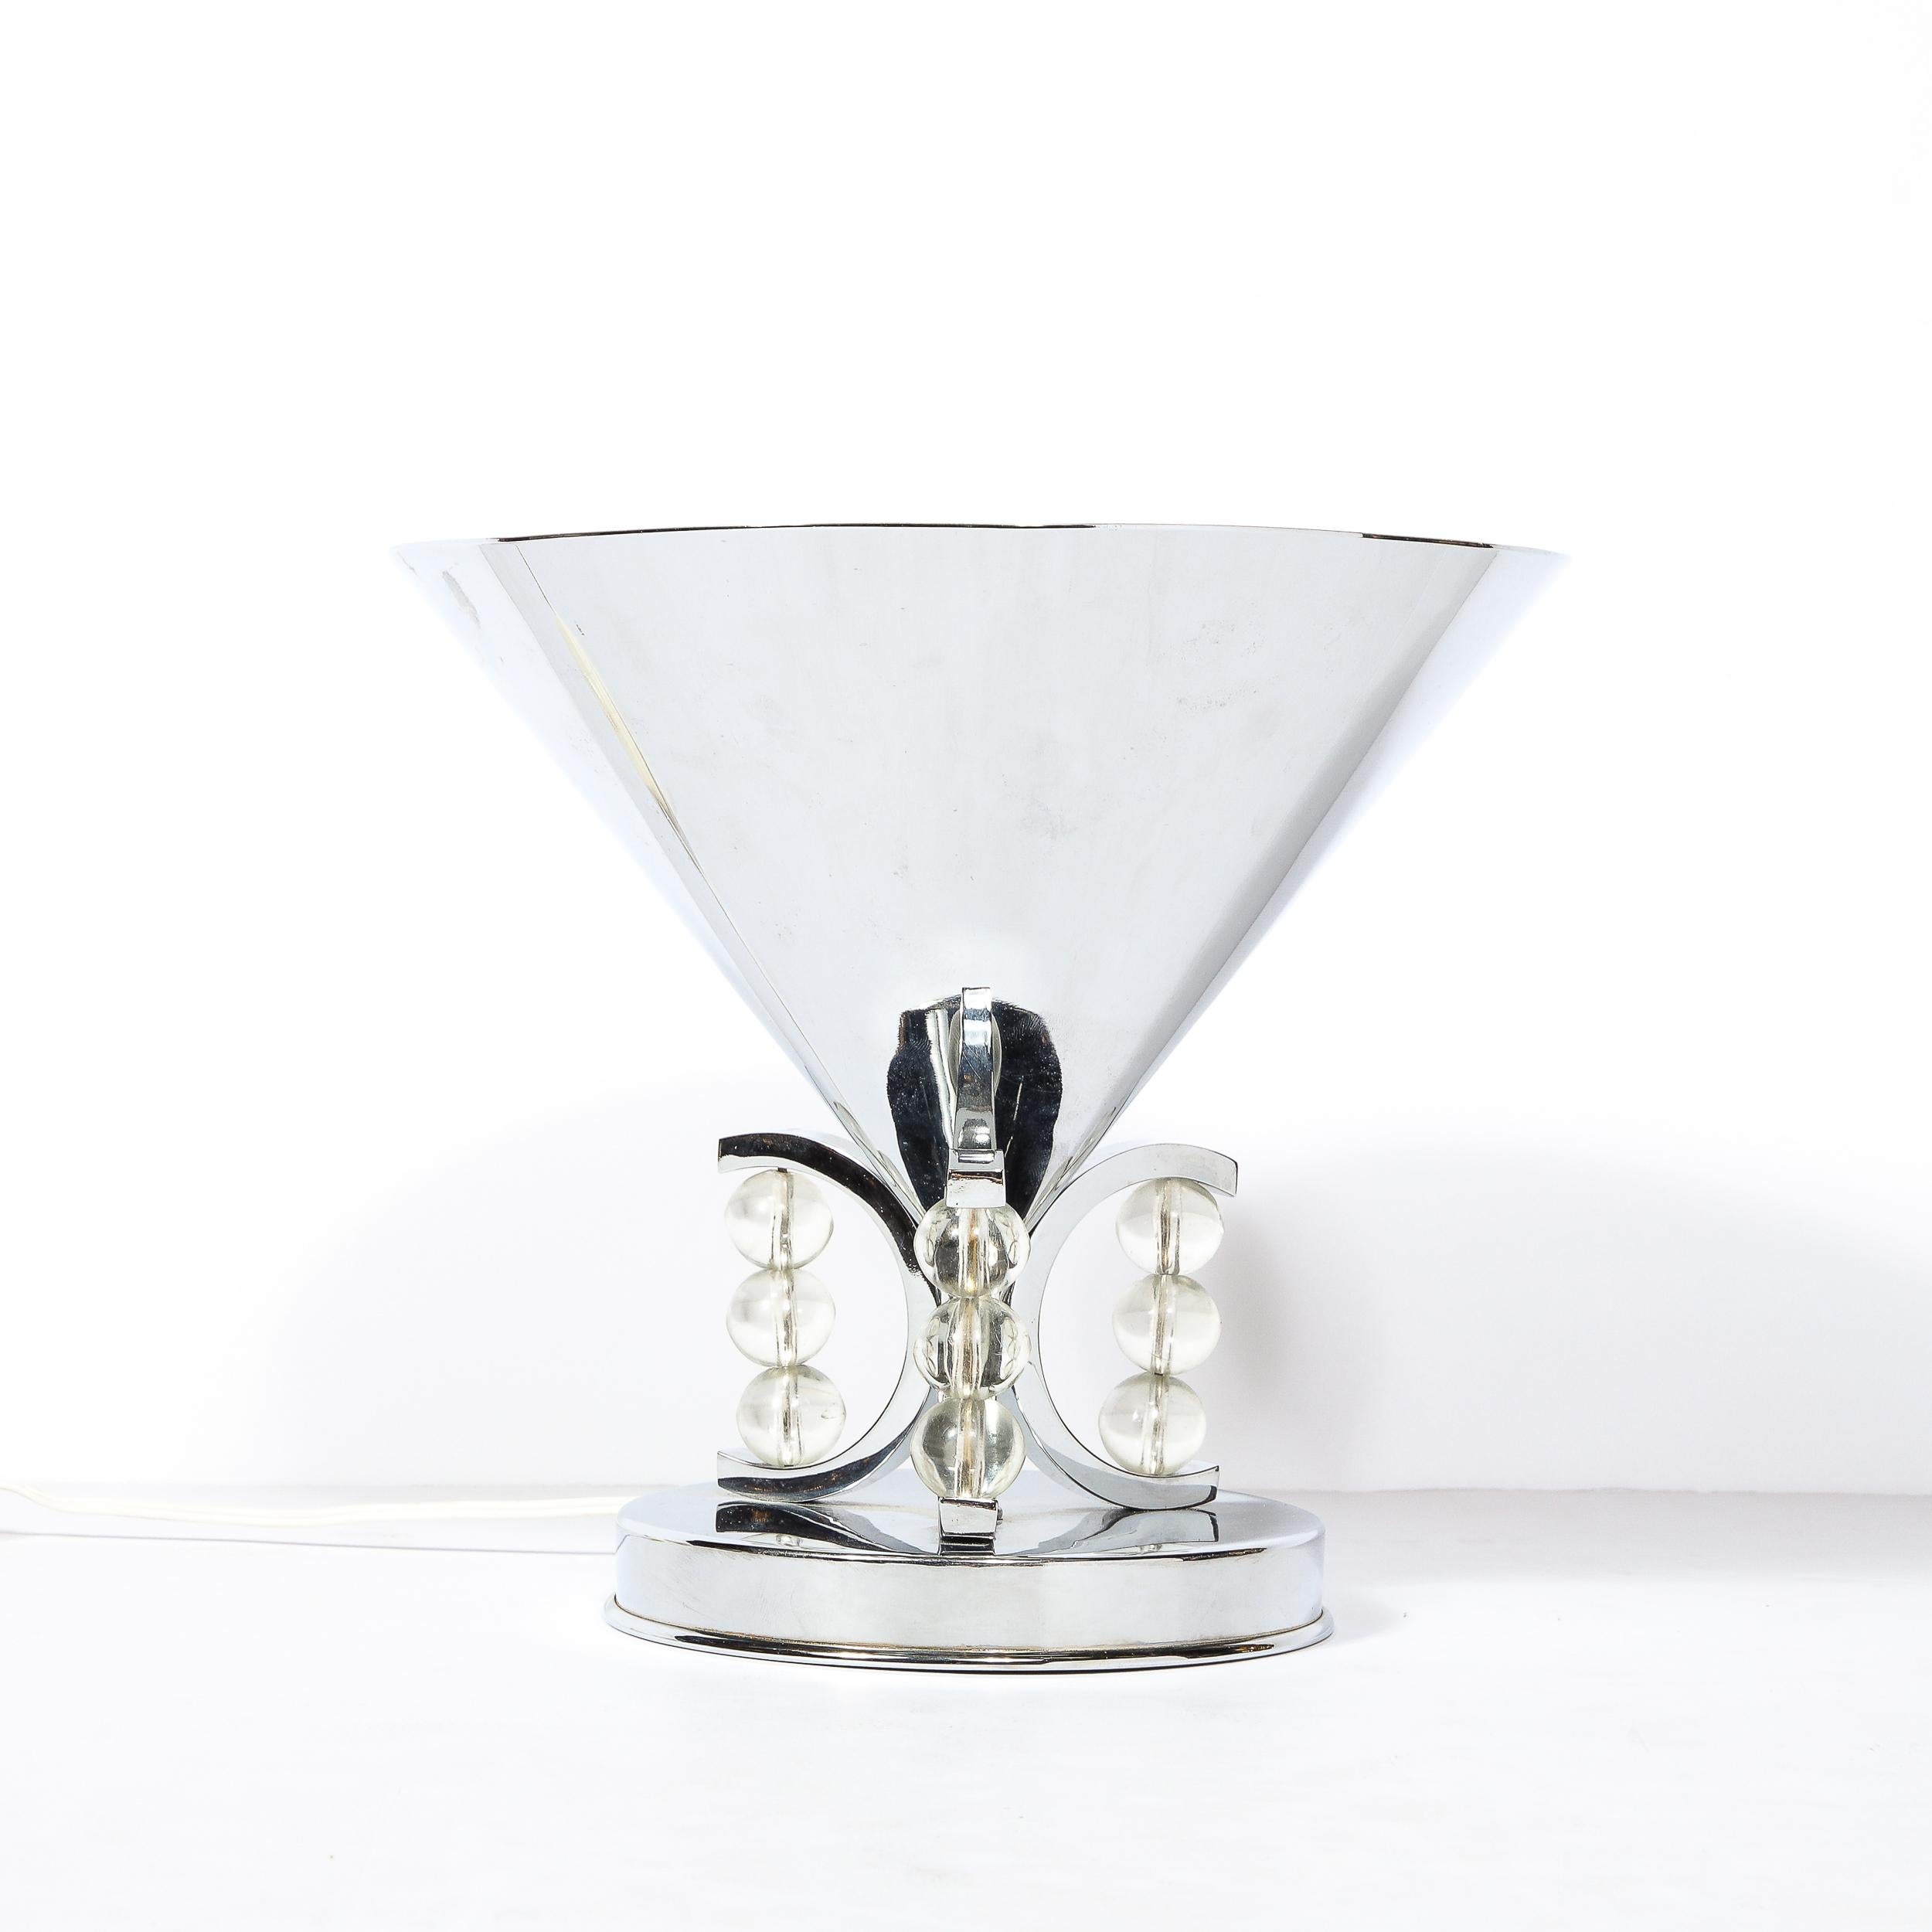 This Art Deco Conical Uplight in Chrome originates from the United States Circa 1935. An embodiment of Art Deco, the piece is an excellent example of elegant sculptural detailing and luxury along with streamline and machine influenced material